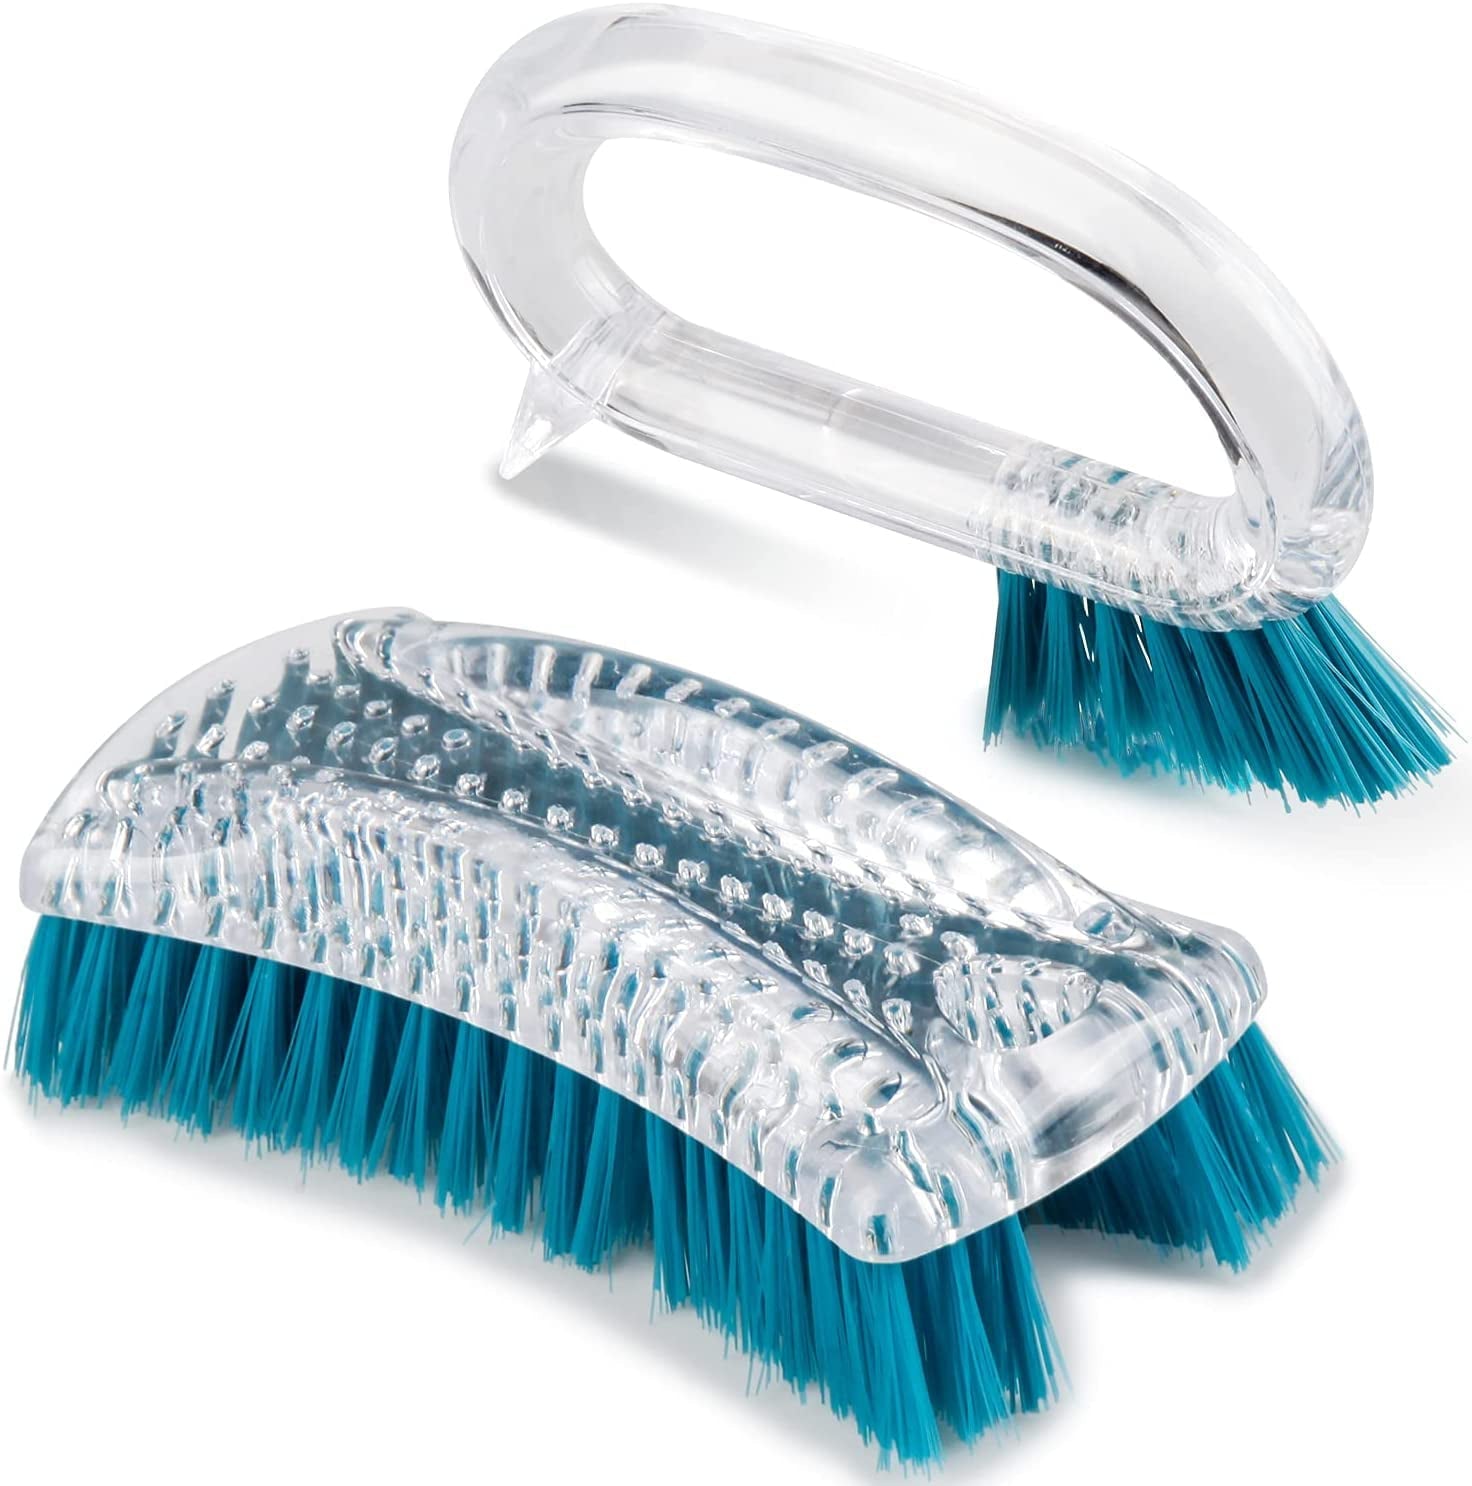 BCOOSS Scrub Brush with Handle for Cleaning Brushes for Bathroom Shower Sink  Carpet Floor 